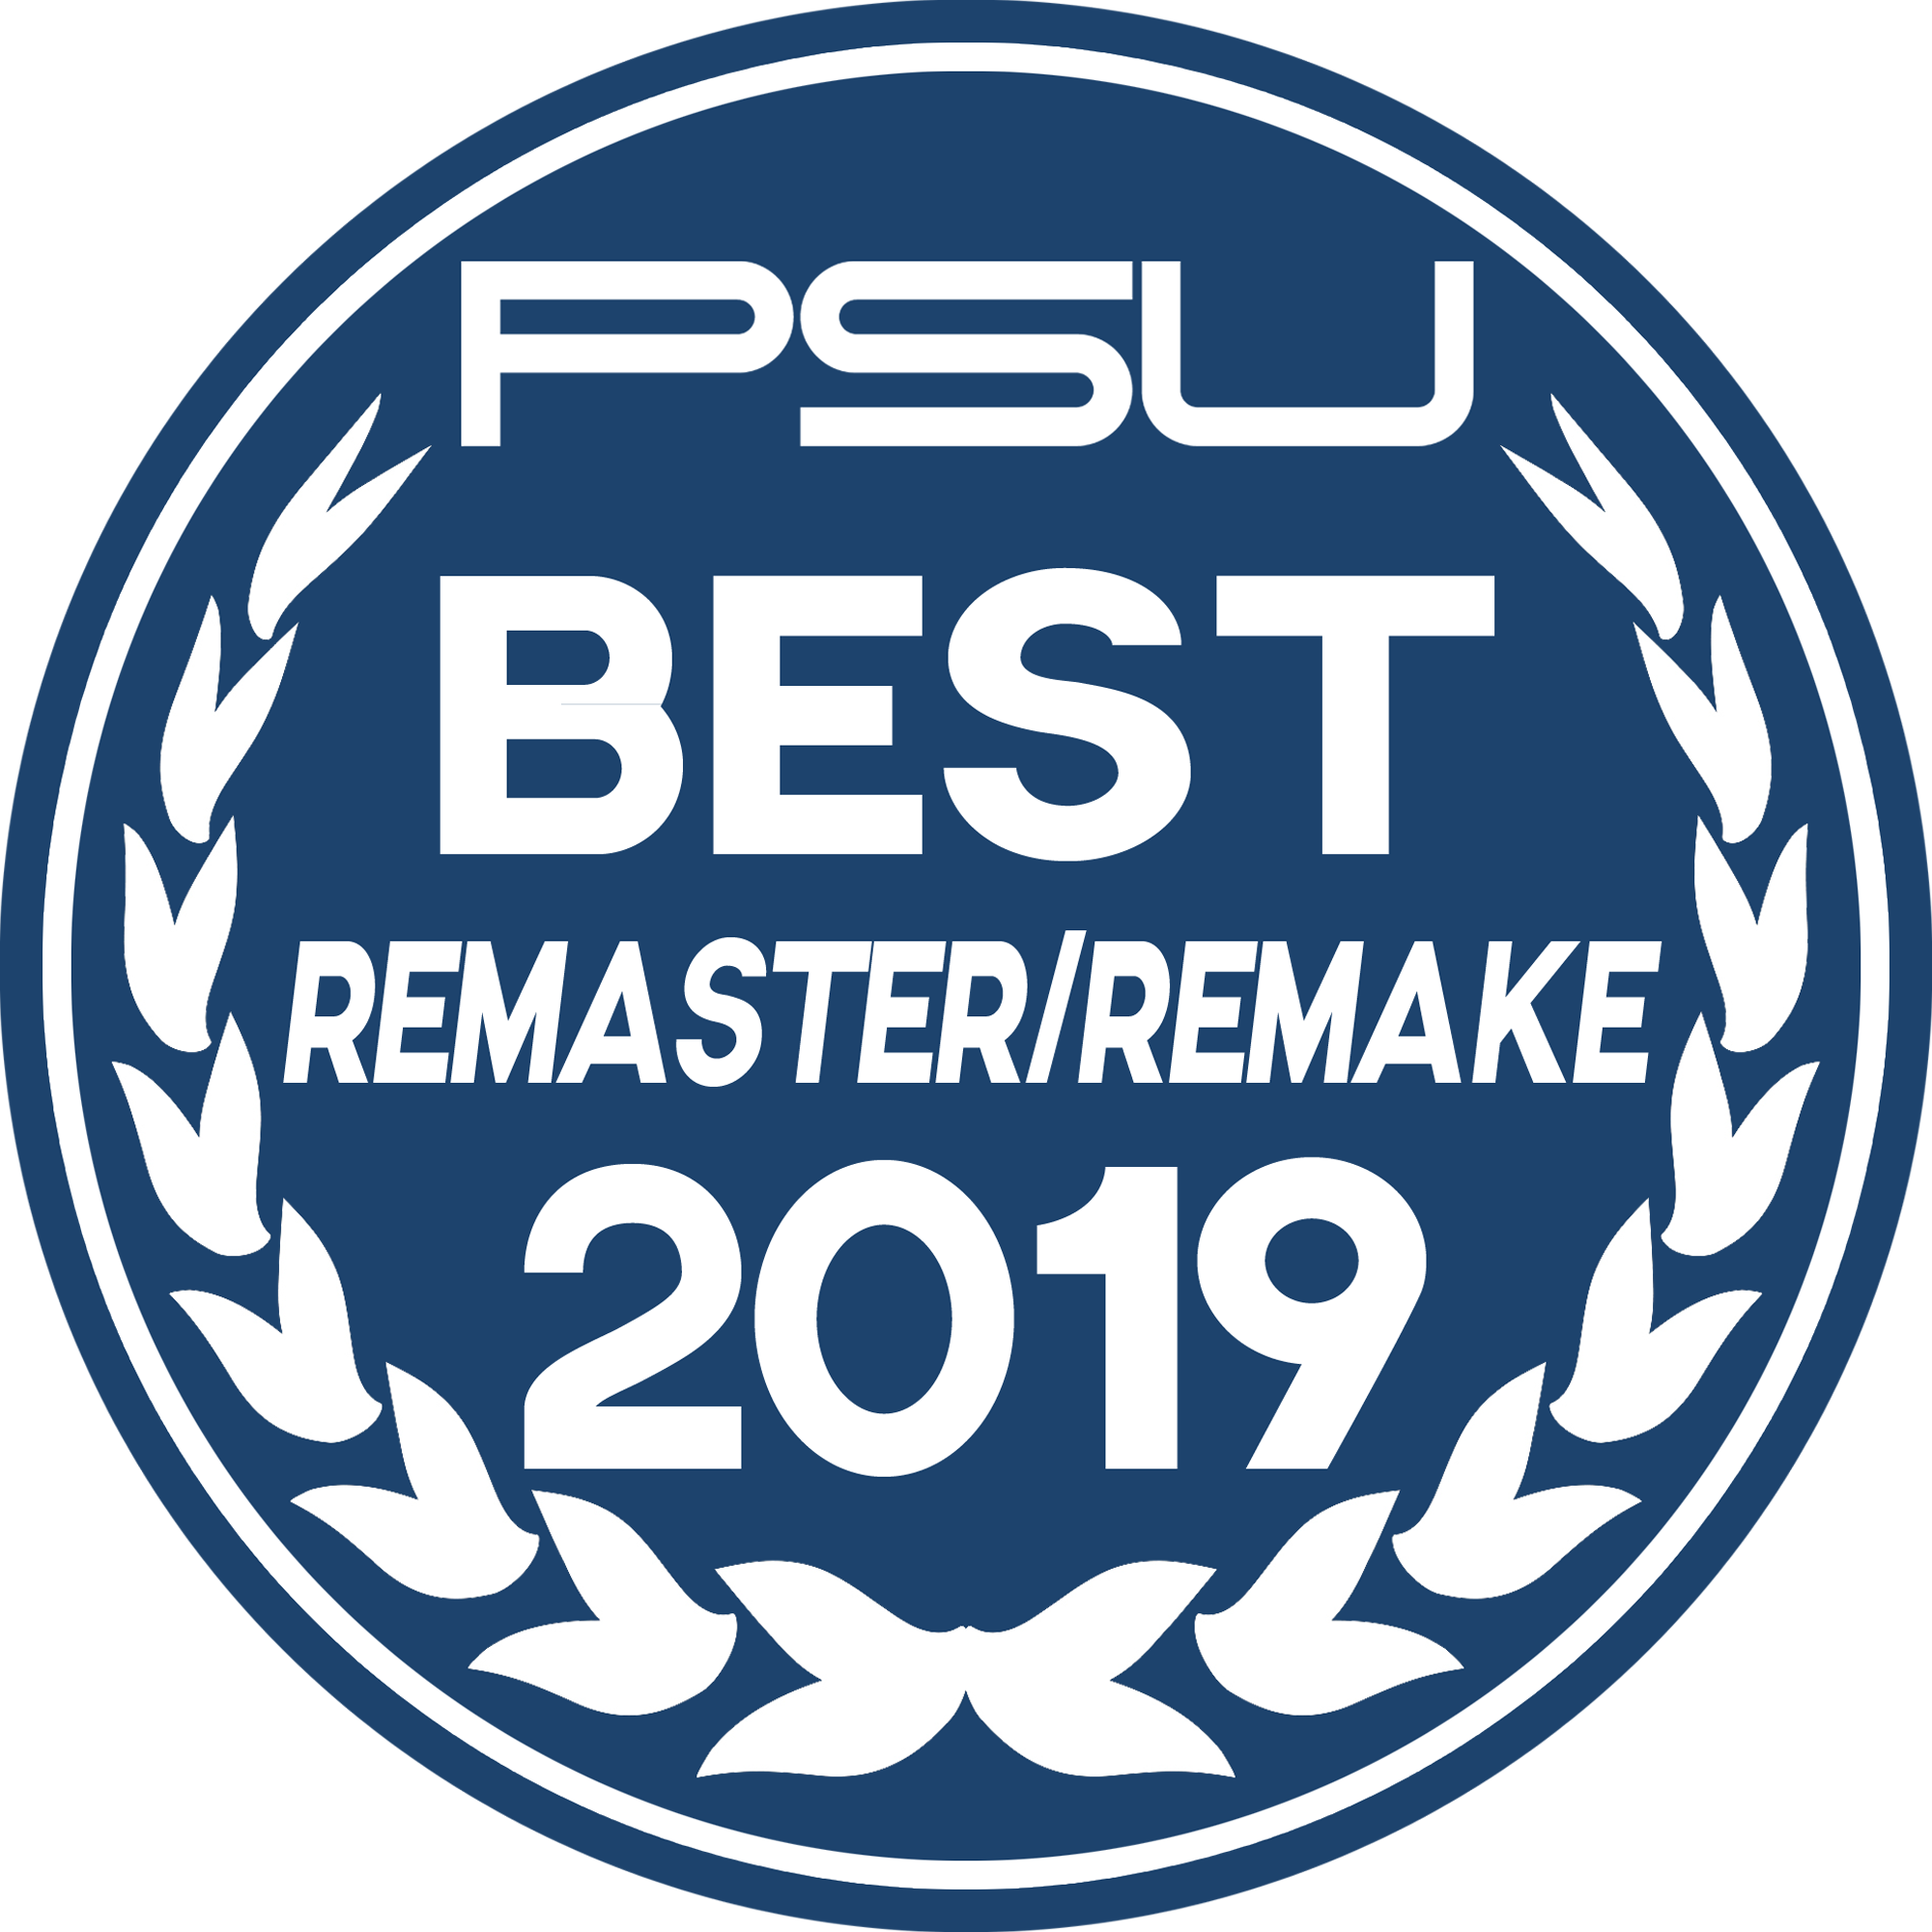 Game of the Year 2019 – Best Remaster/Remake